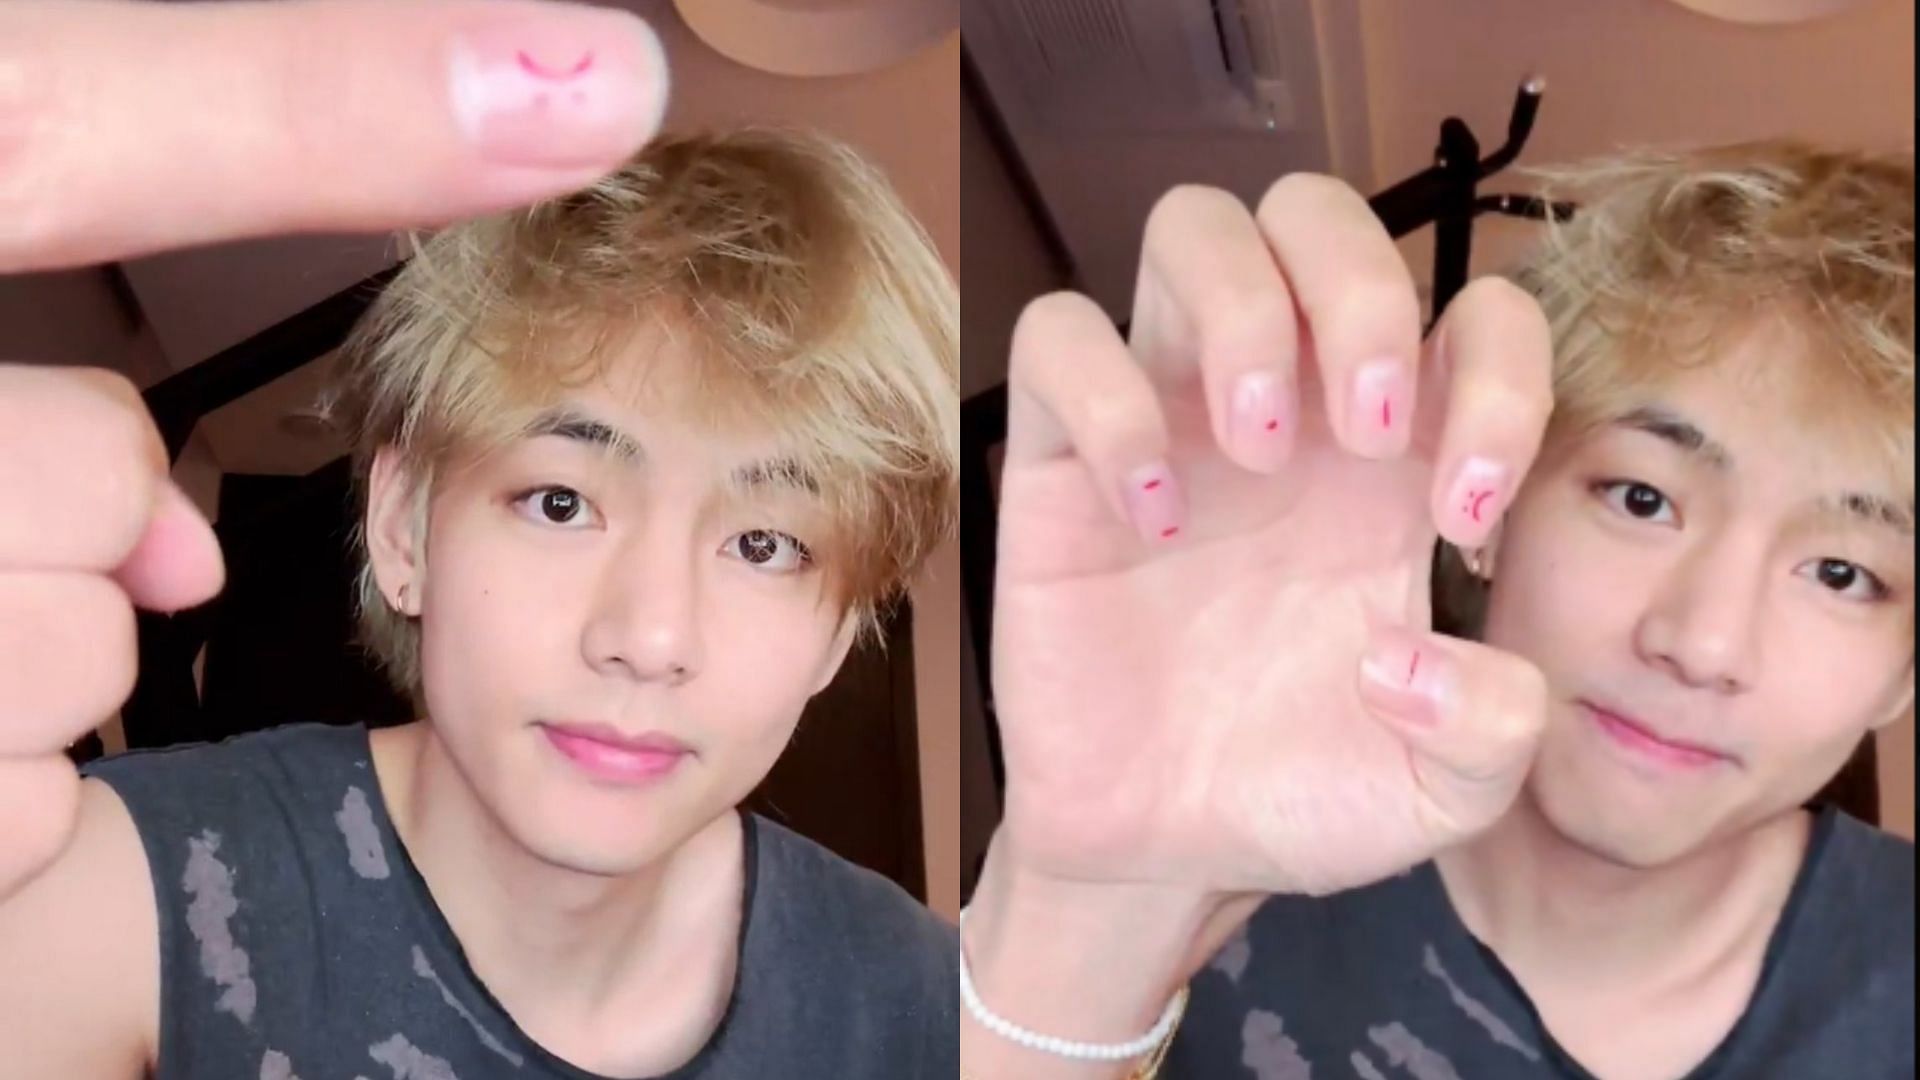 “Look at him and his pretty nails”: BTS’ V’s fans compliment his new ...